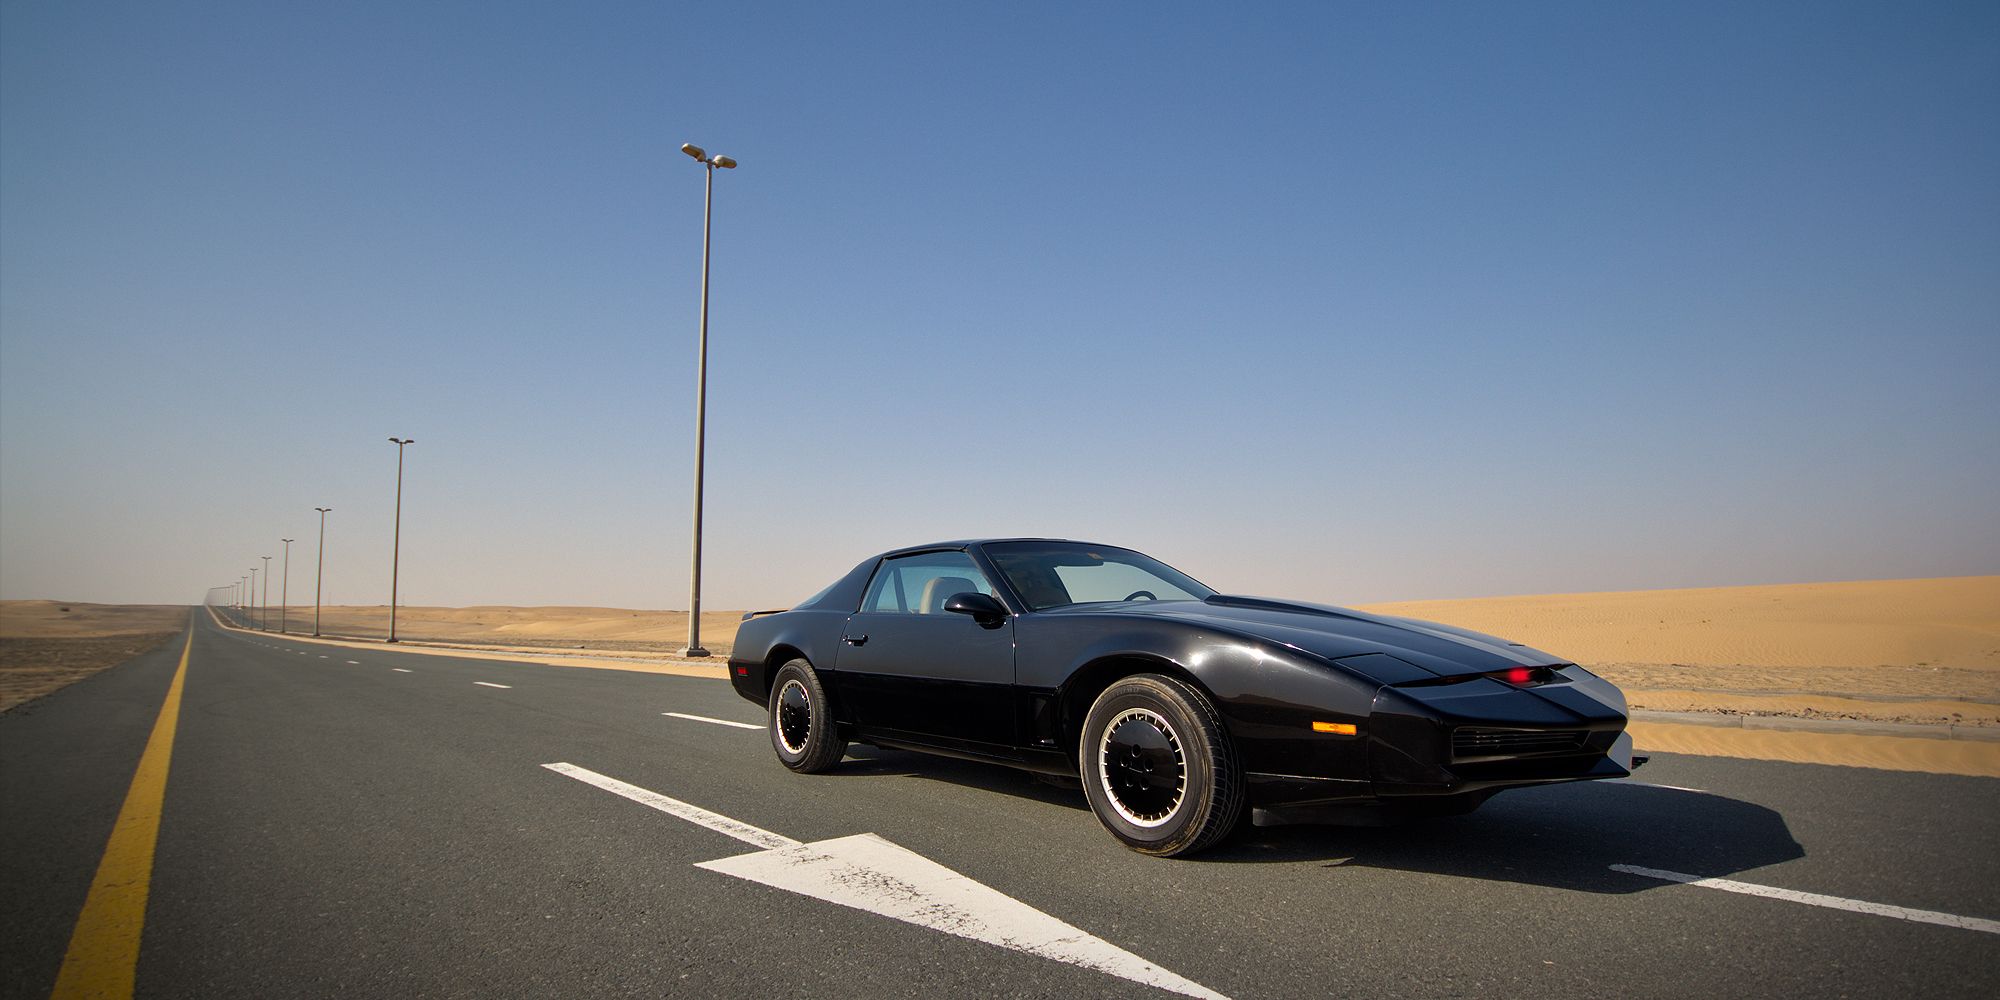 KITT on a highway in the Middle East